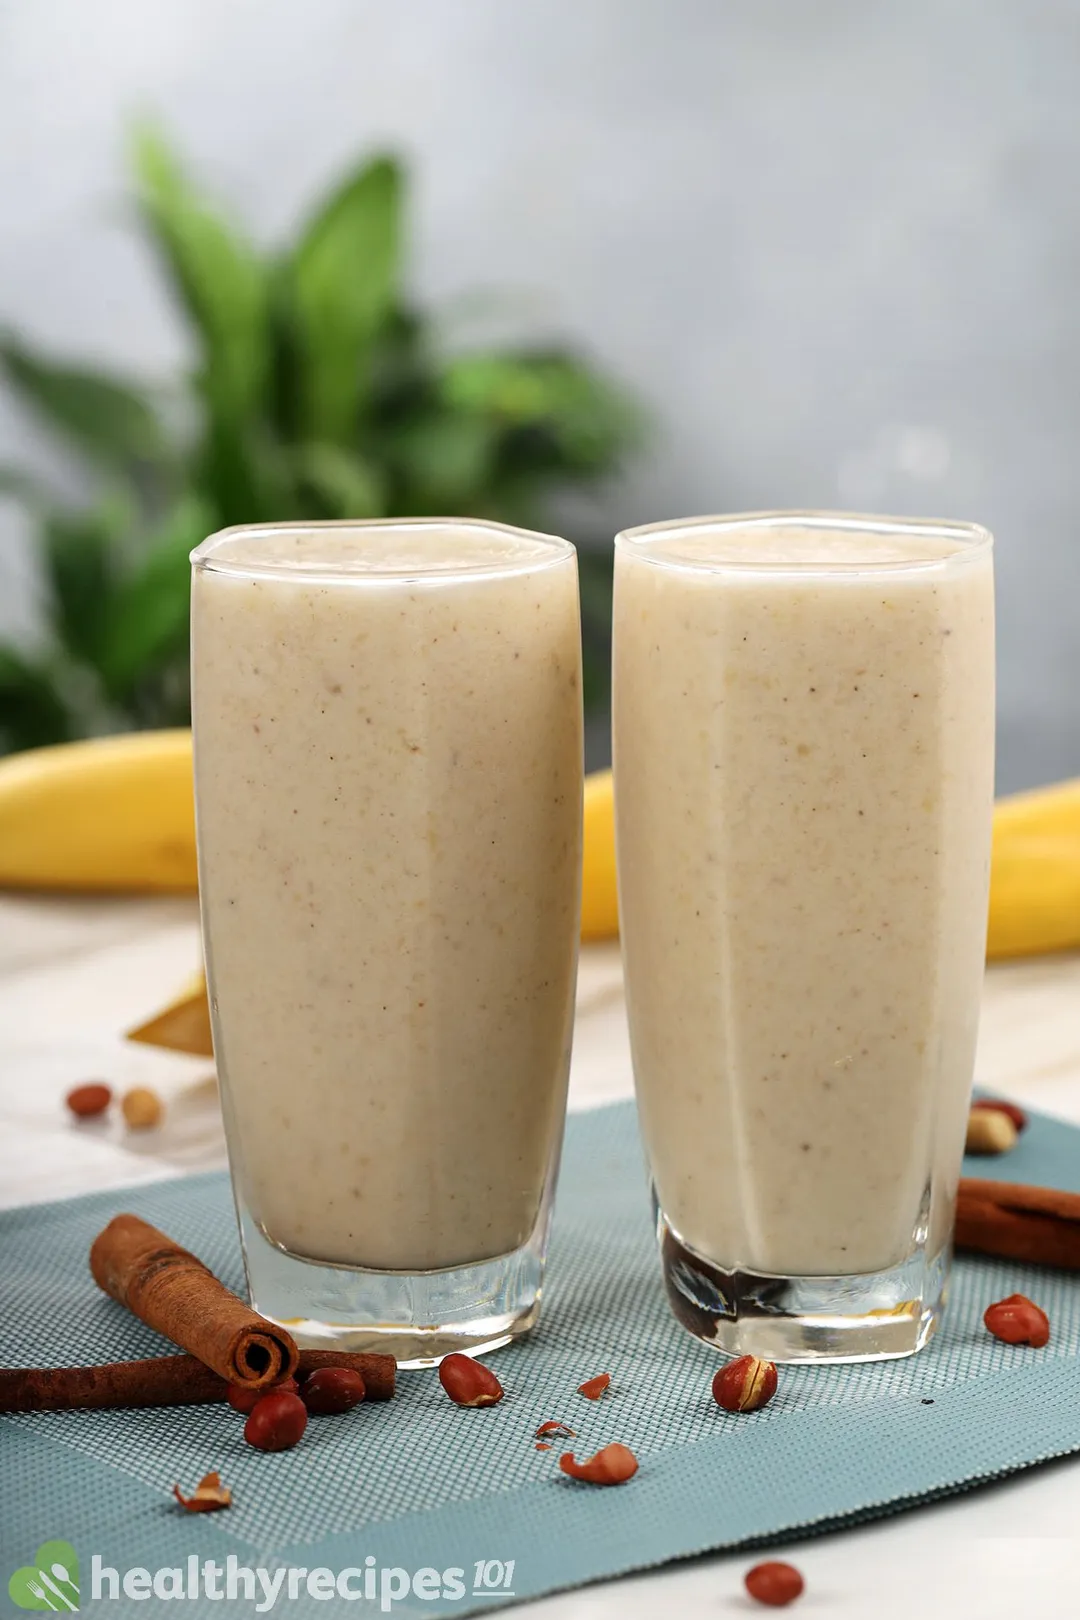 Two glasses of Peanut Butter Banana Smoothie, a cinnamon stick, and some roasted peanuts placed on a blue cloth with some unpeeled yellow bananas in the back.